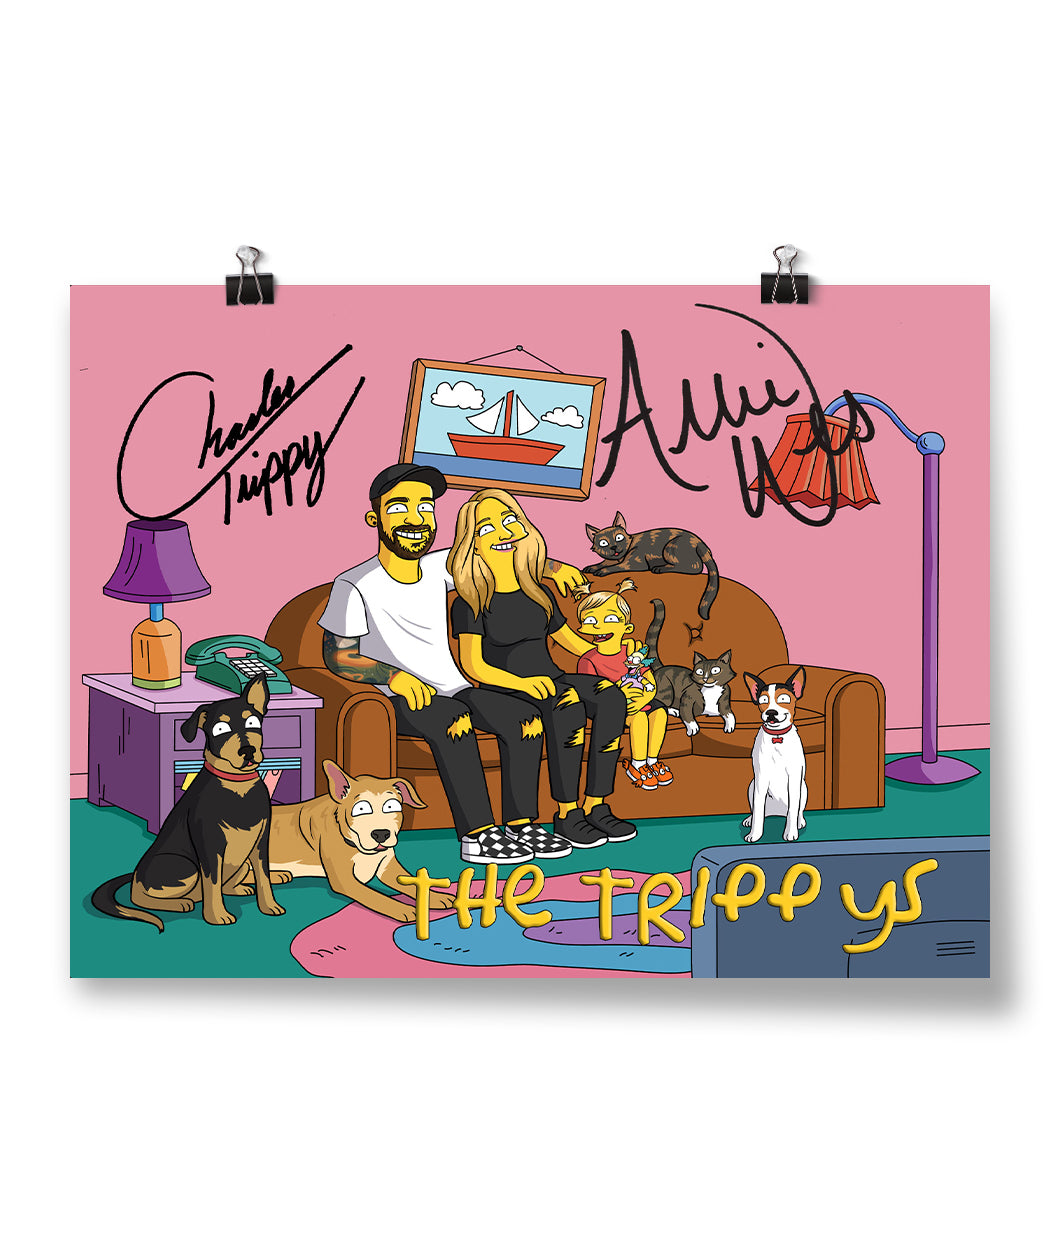 A signed poster of 2 adults, 1 child, 3 dogs, and 2 cats sitting in a living room drawn in the style of The Simpsons - by Charles Trippy